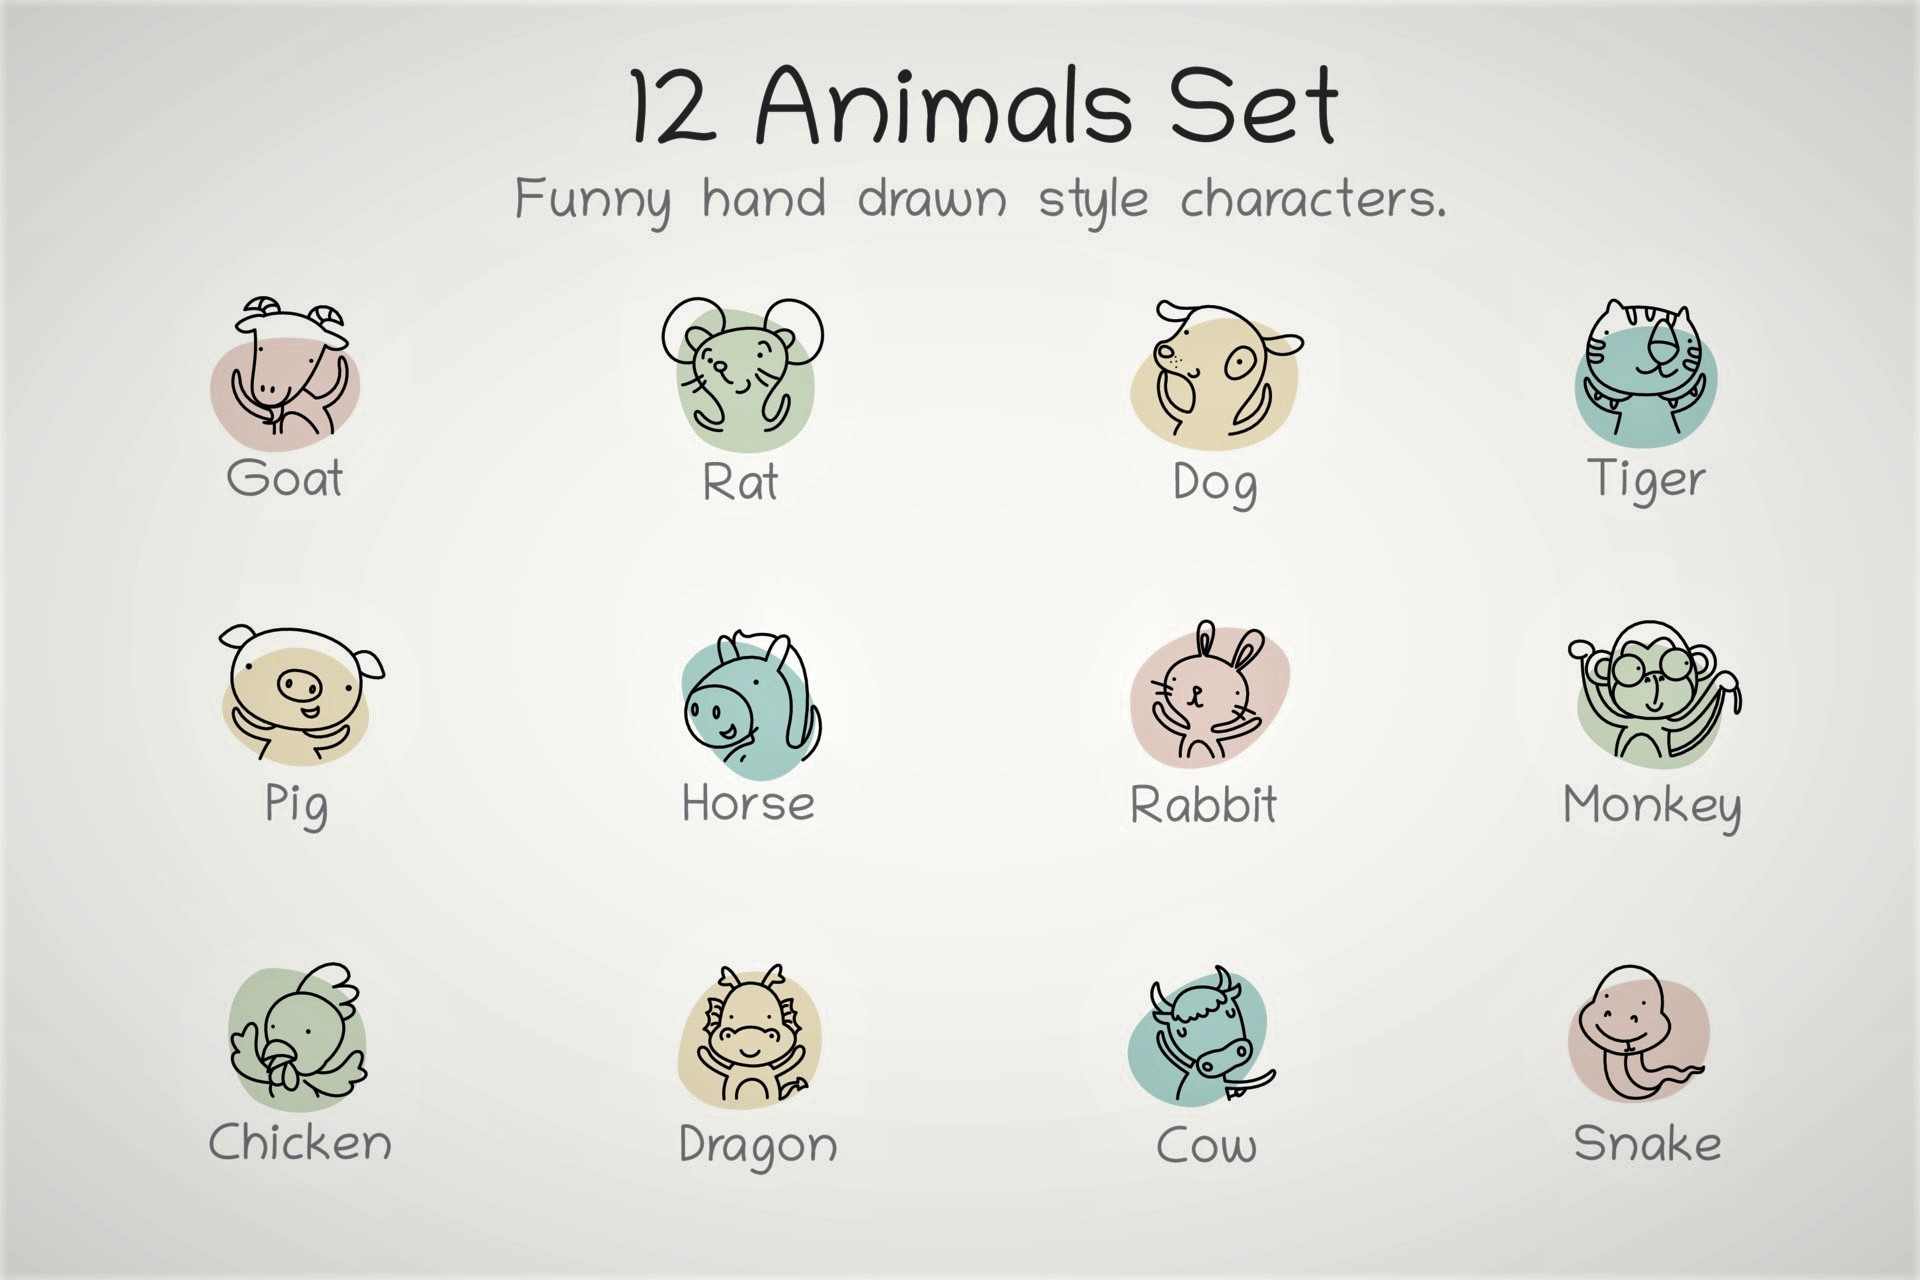 Horoscope of 12 armored animals in 2022